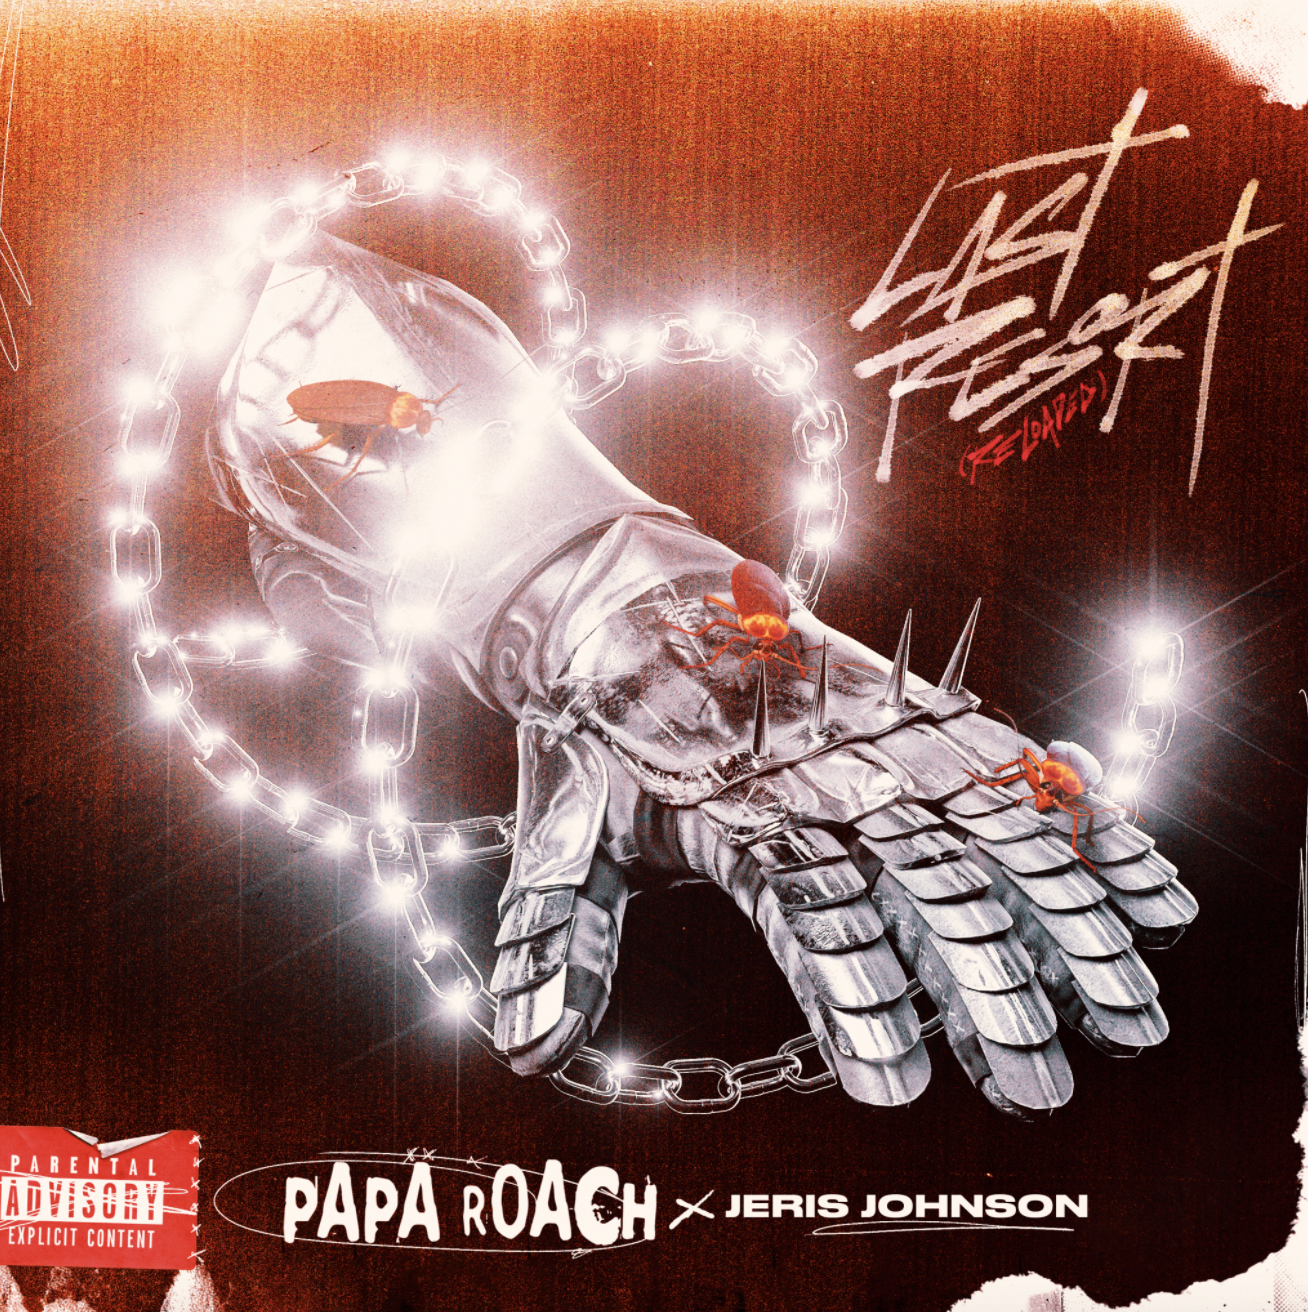 Papa Roach & Jeris Johnson join forces for "Last Resort (Reloaded)" / celebrate the 20th anniversary of the renowned track       